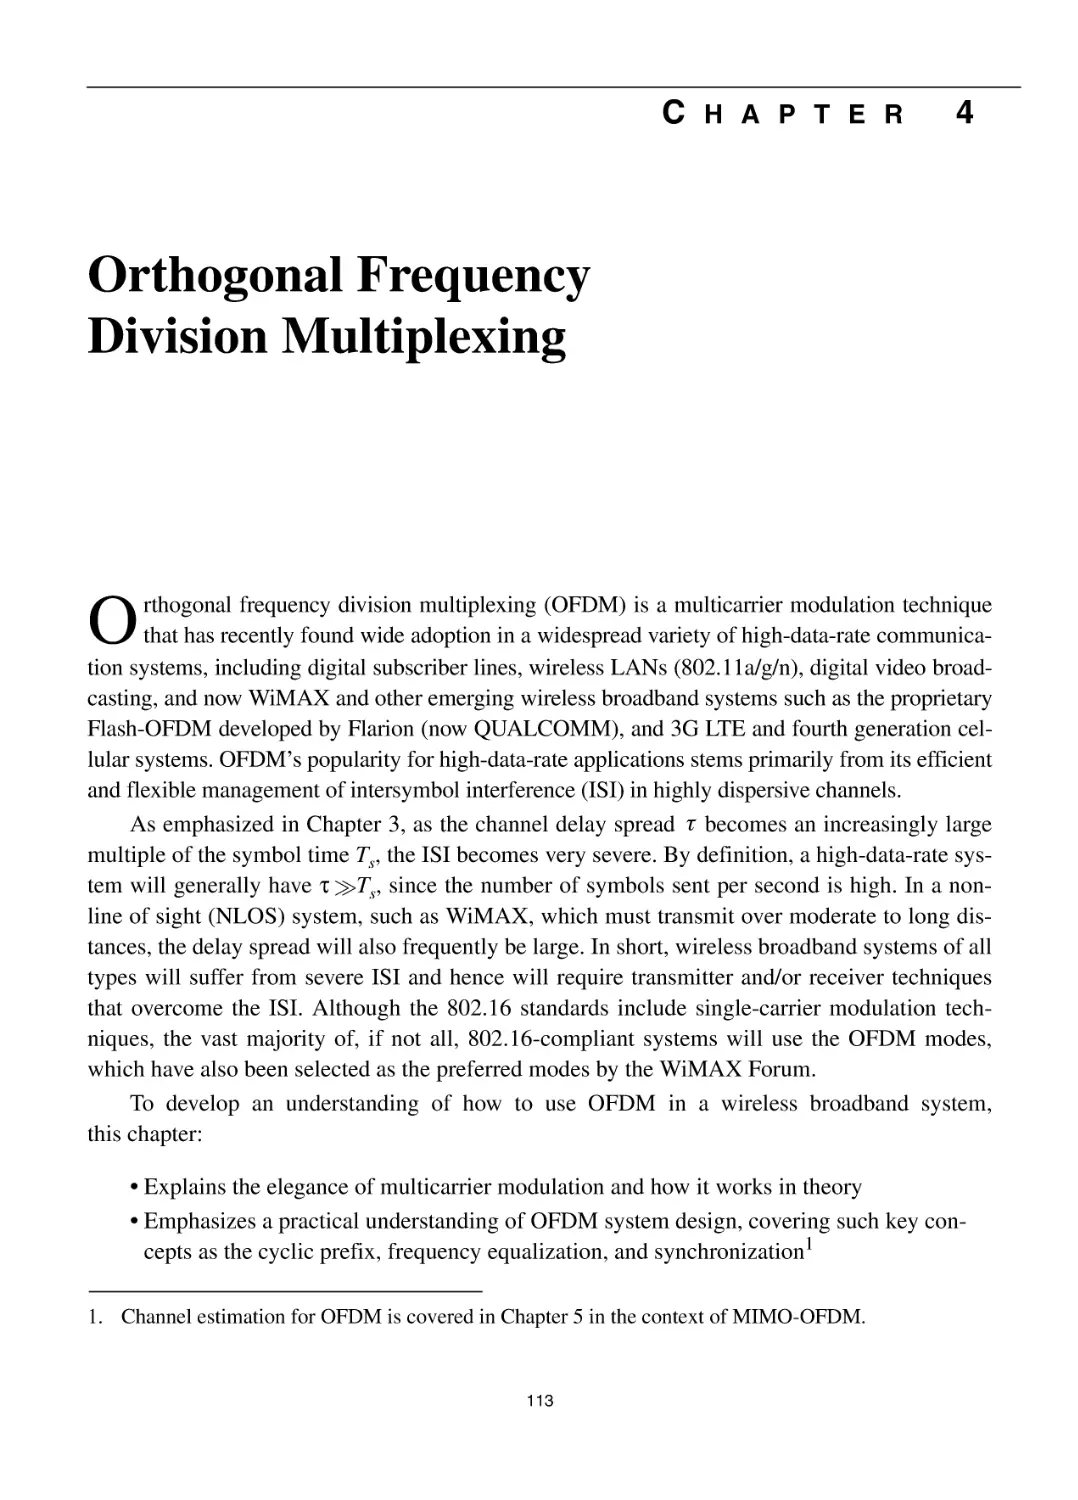 4 Orthogonal Frequency Division Multiplexing